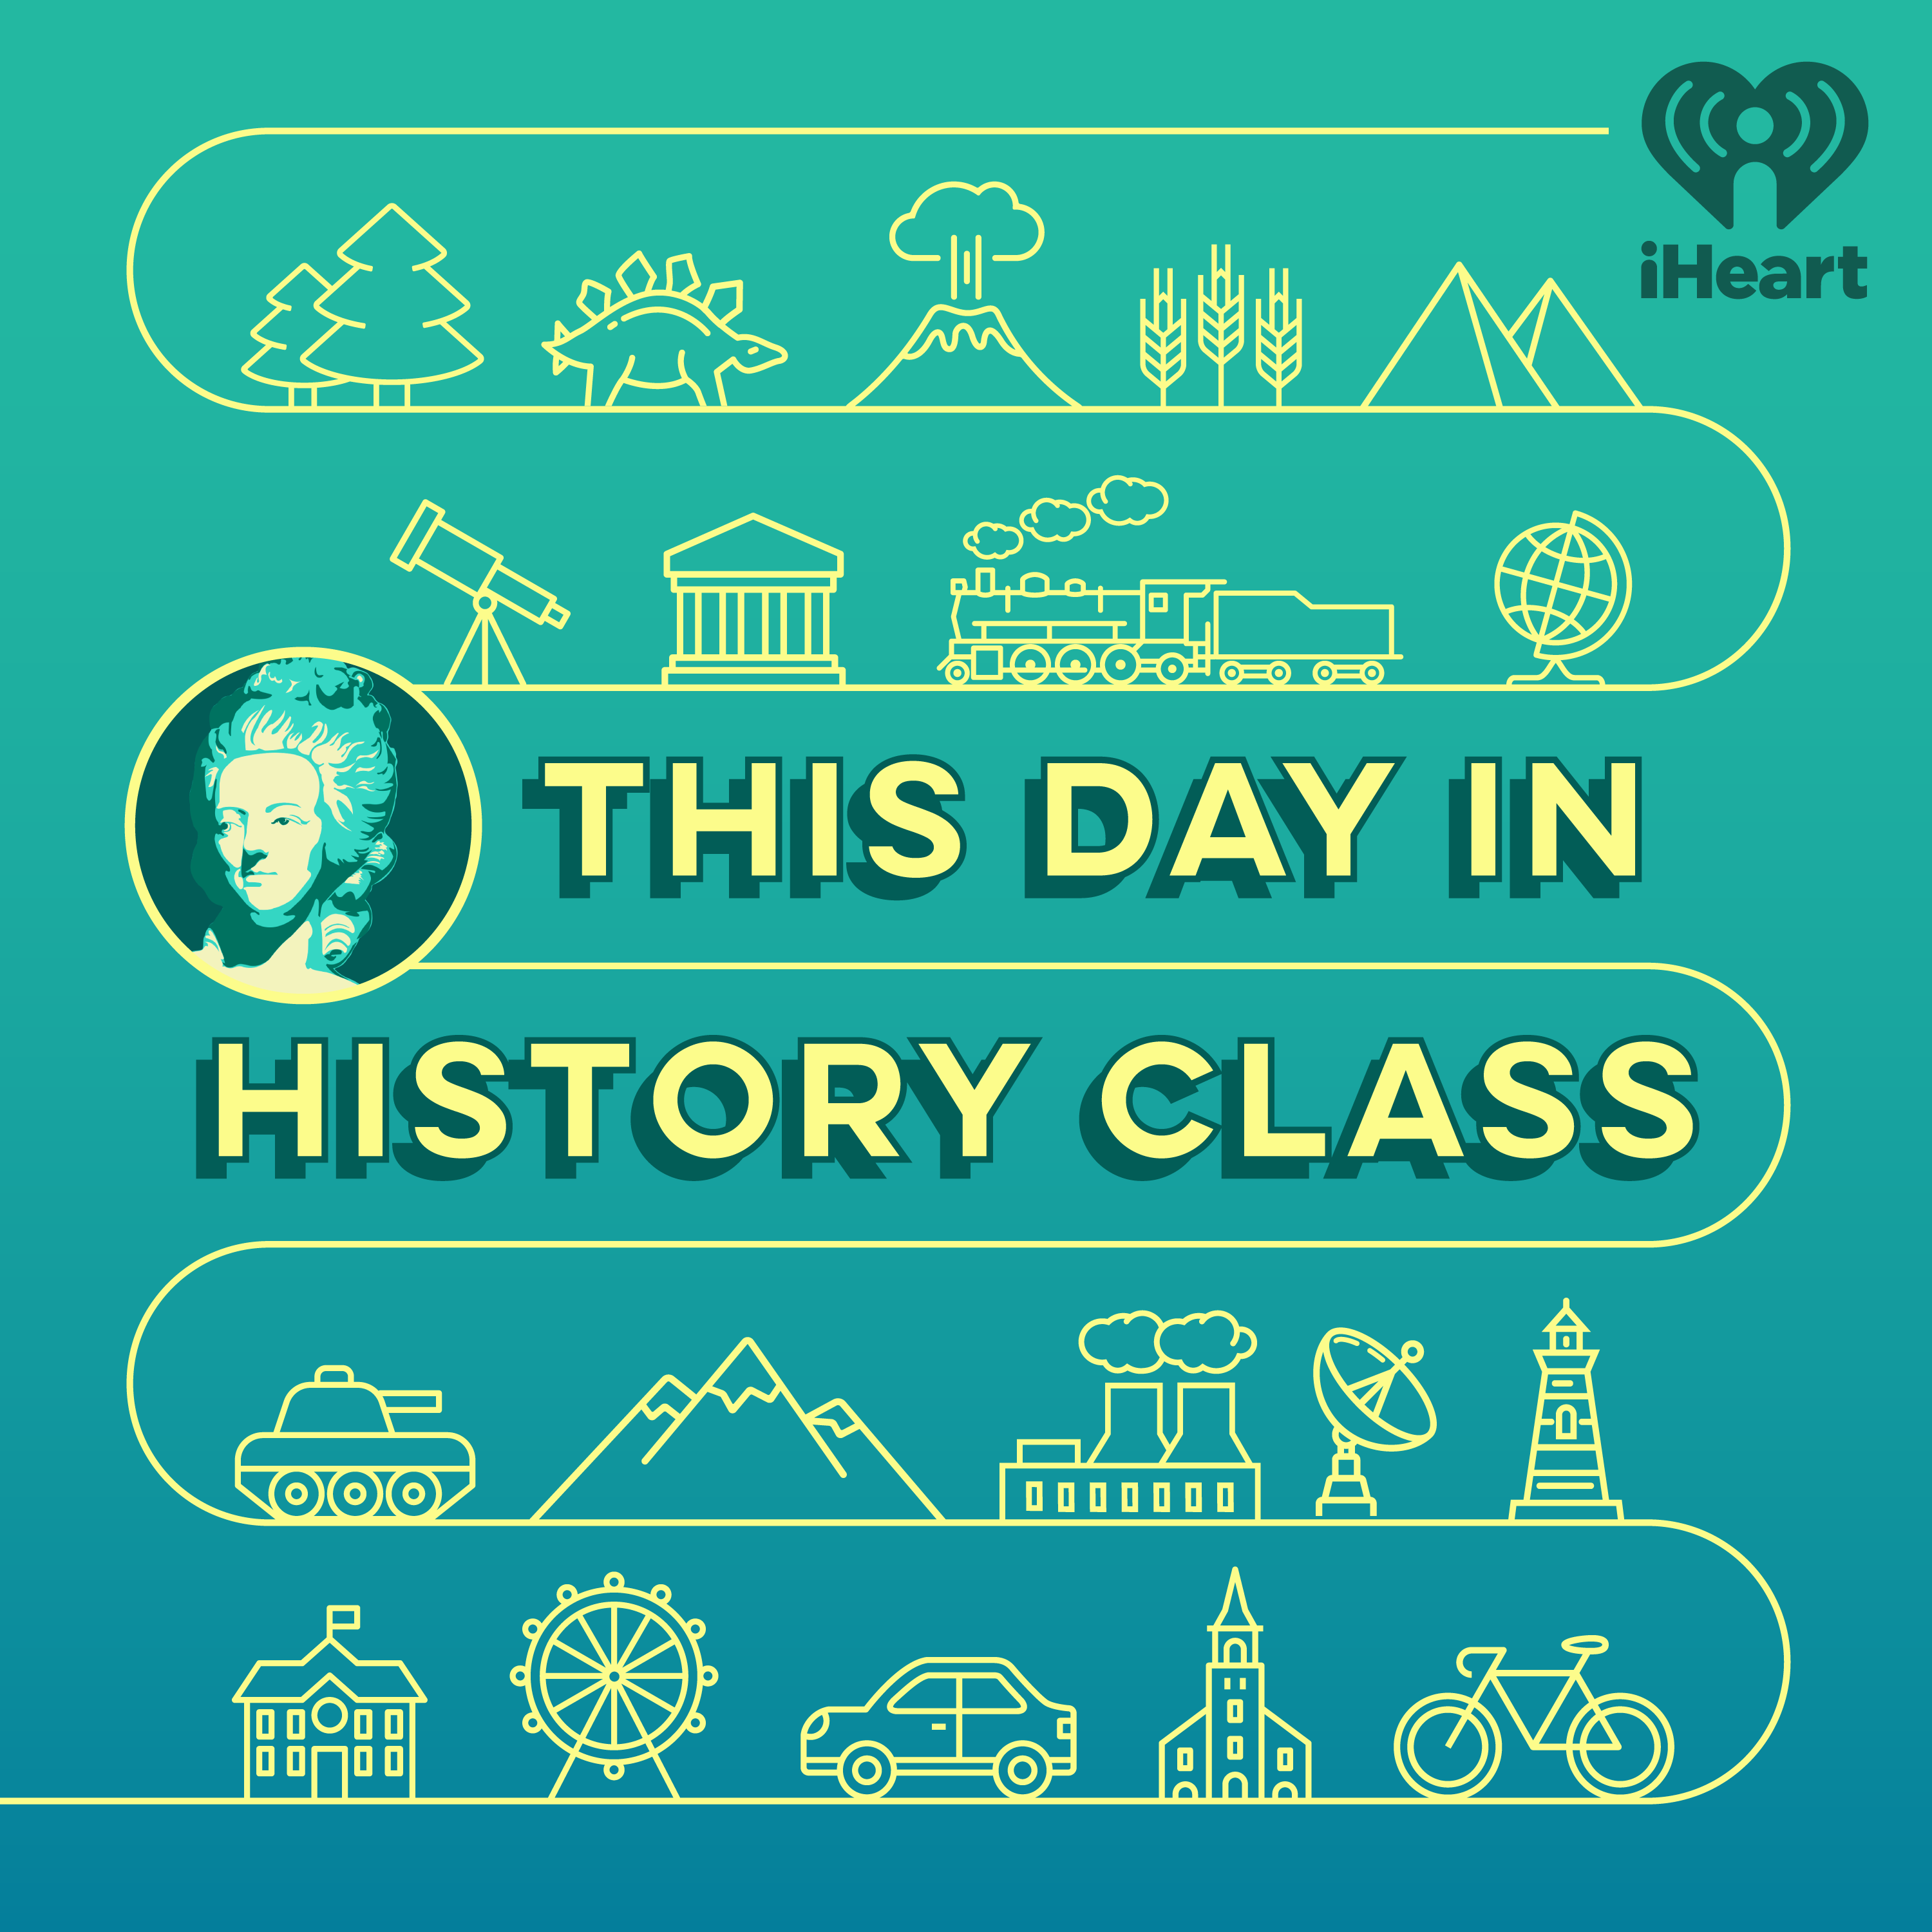 This Day In History Class - December 14th